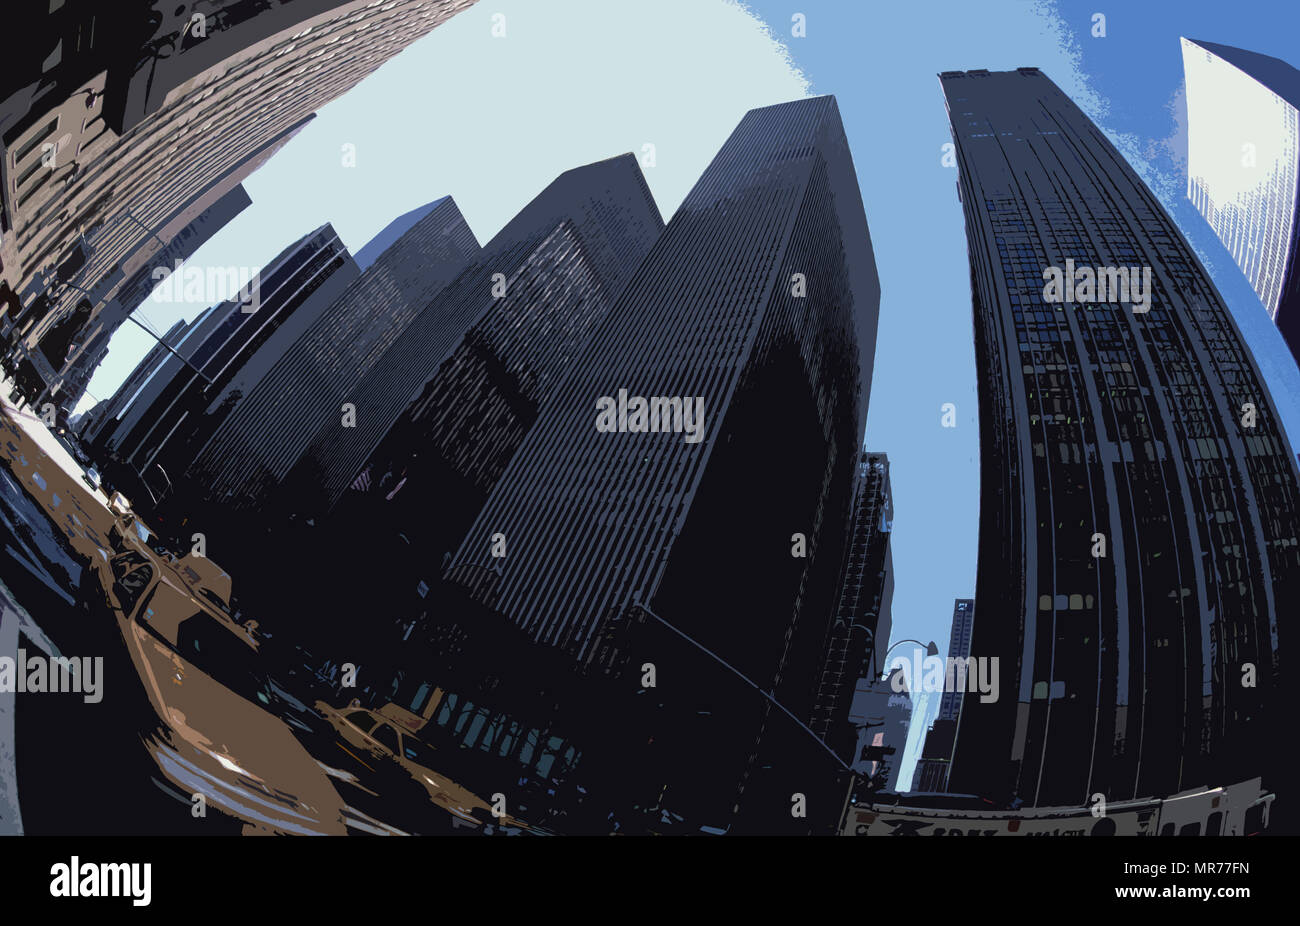 View looking up with wide angle lens on Ave. of the Americas, in midtown Manhattan, showing taxis and row of identical towers, New York, NY, USA Stock Photo